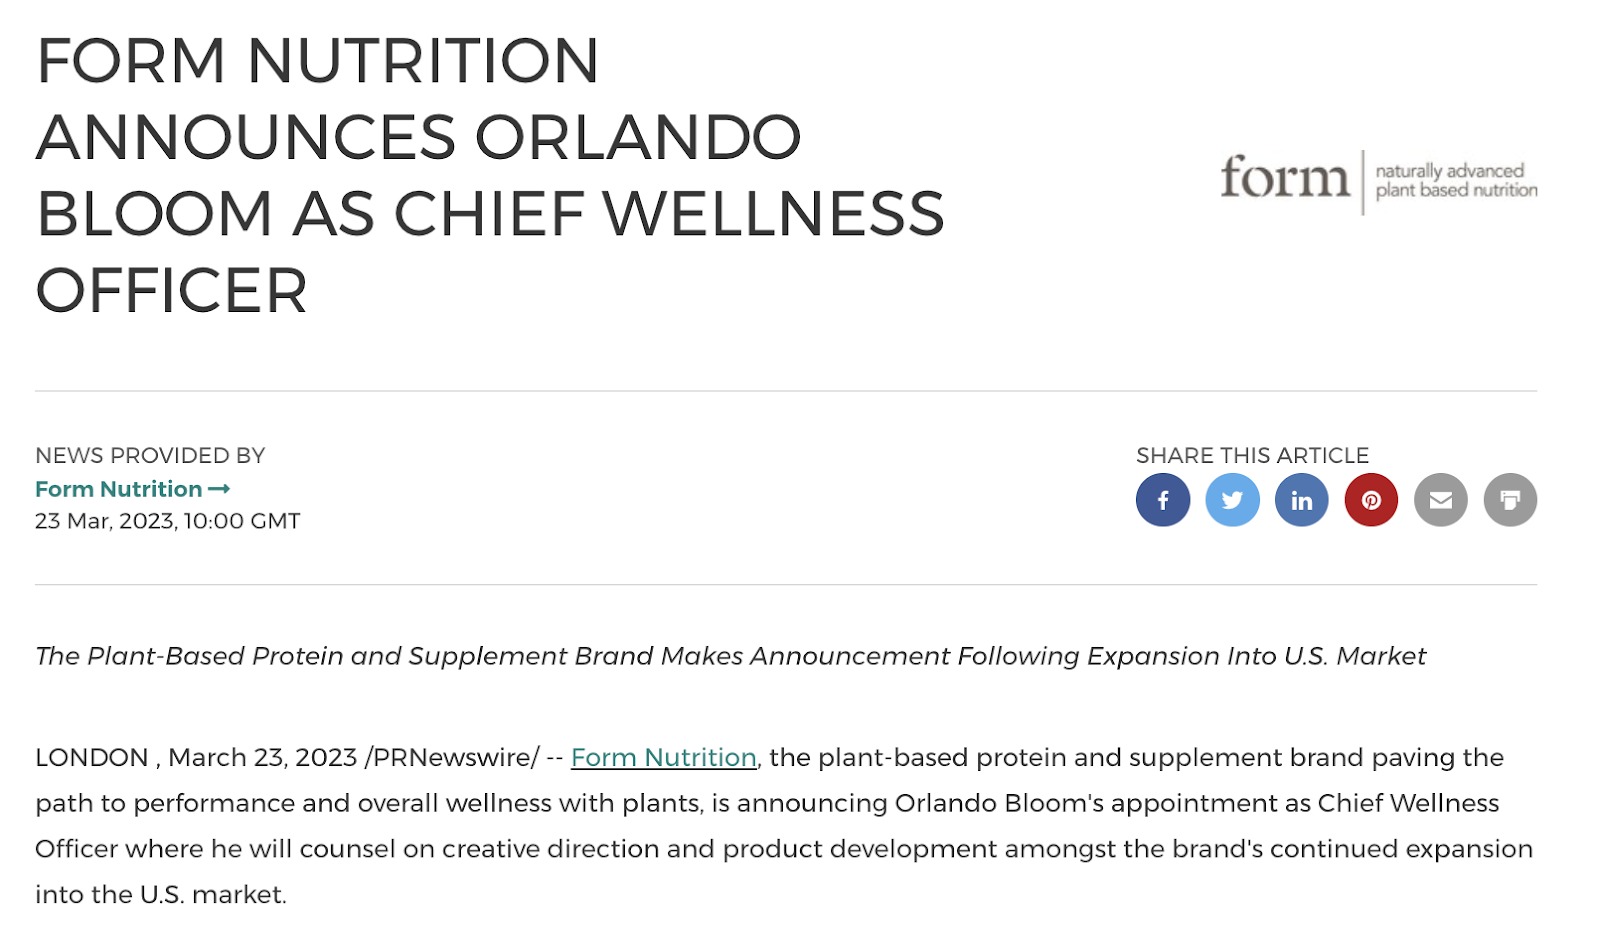 "Form Nutrition announces Orlando Bloom as Chief Wellness Officer" press release